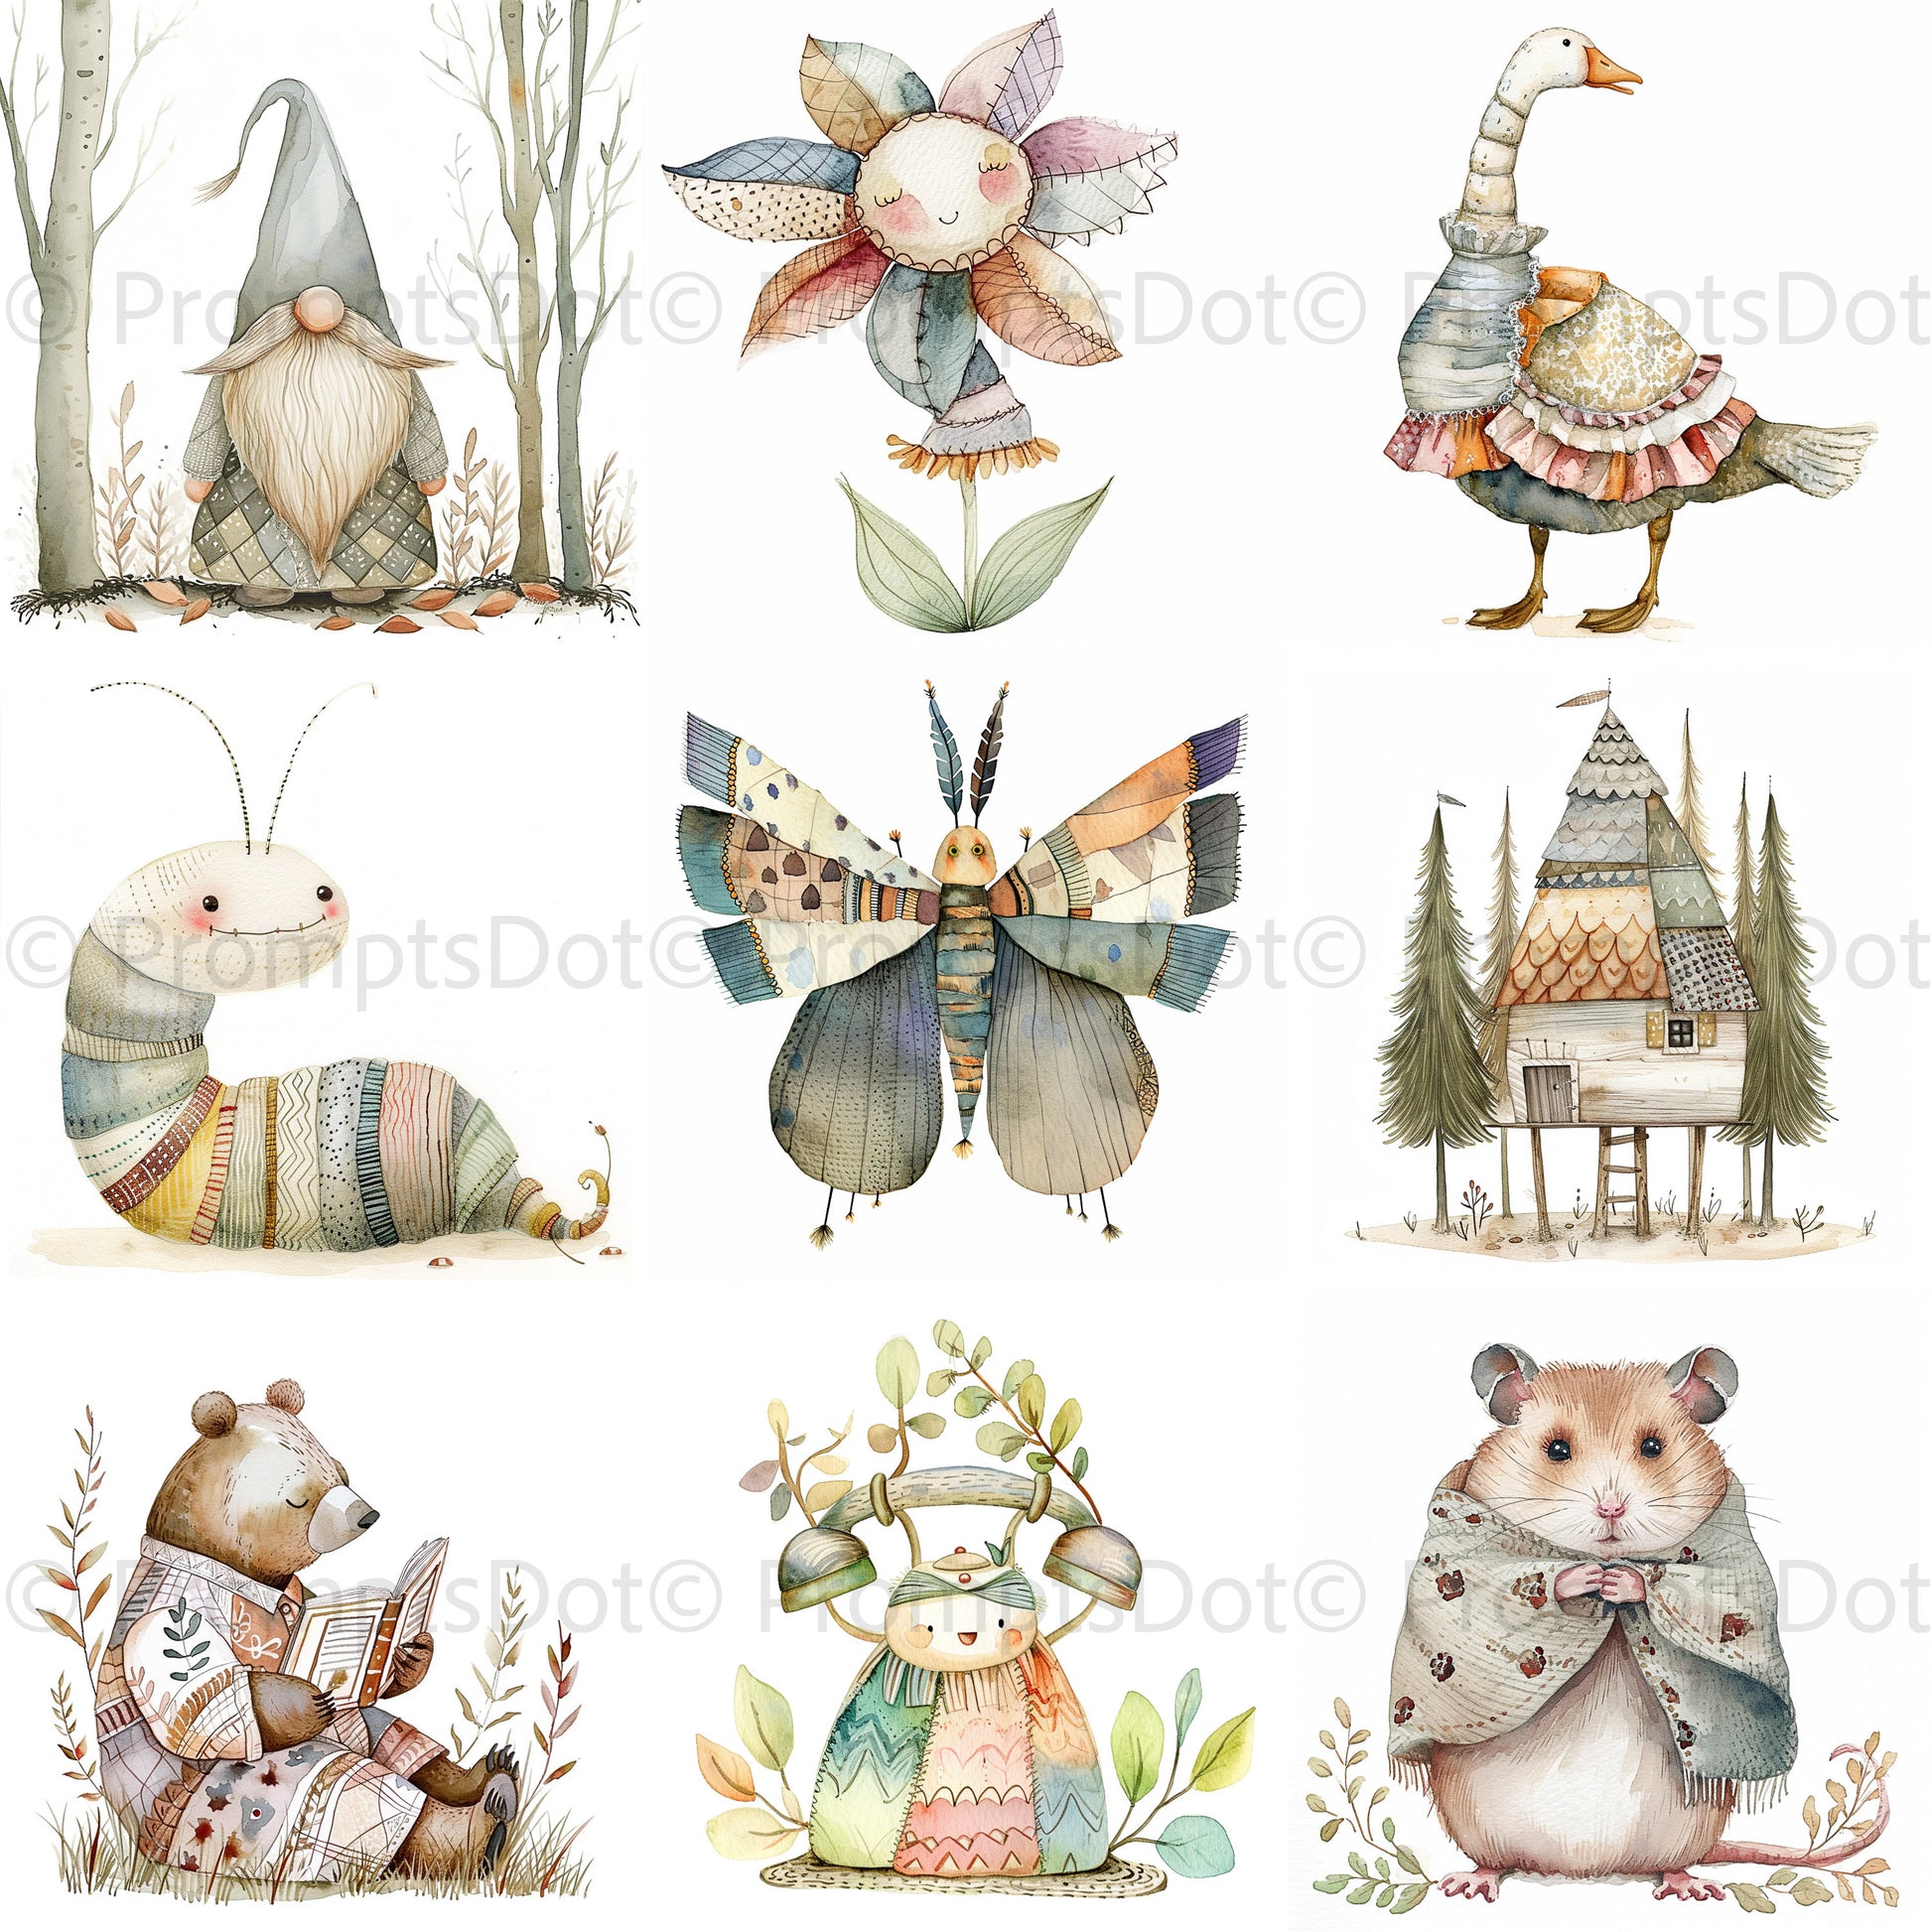 Vintage Whimsical Characters Midjourney Prompt